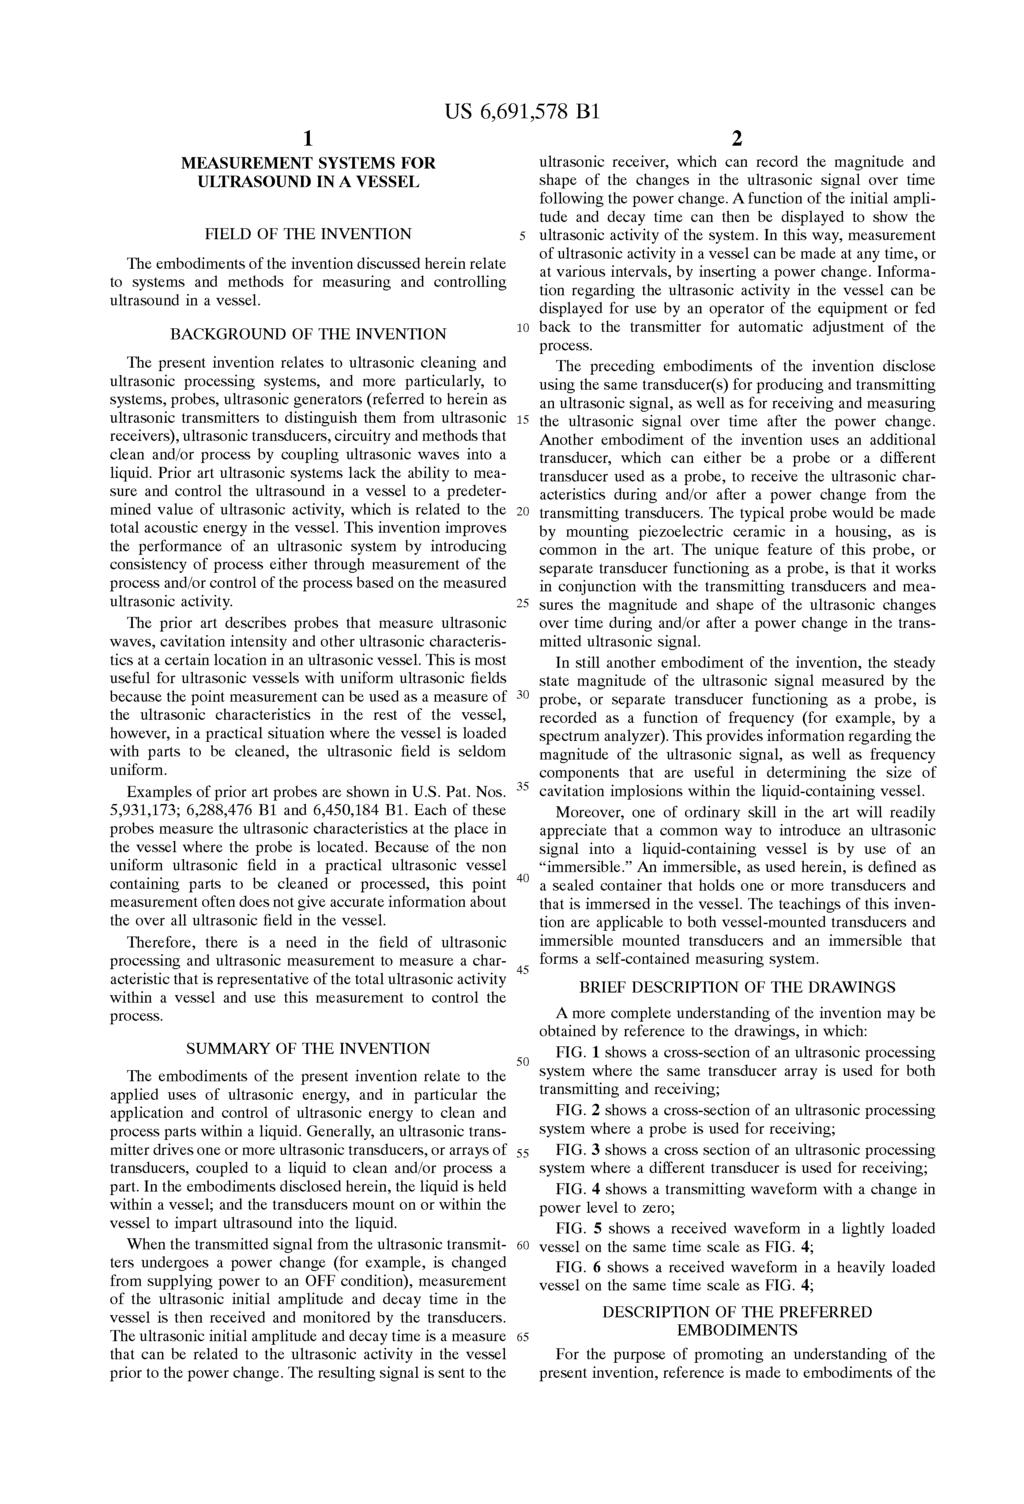 1 MEASUREMENT SYSTEMS FOR ULTRASOUND IN A WESSEL FIELD OF THE INVENTION The embodiments of the invention discussed herein relate to Systems and methods for measuring and controlling ultrasound in a